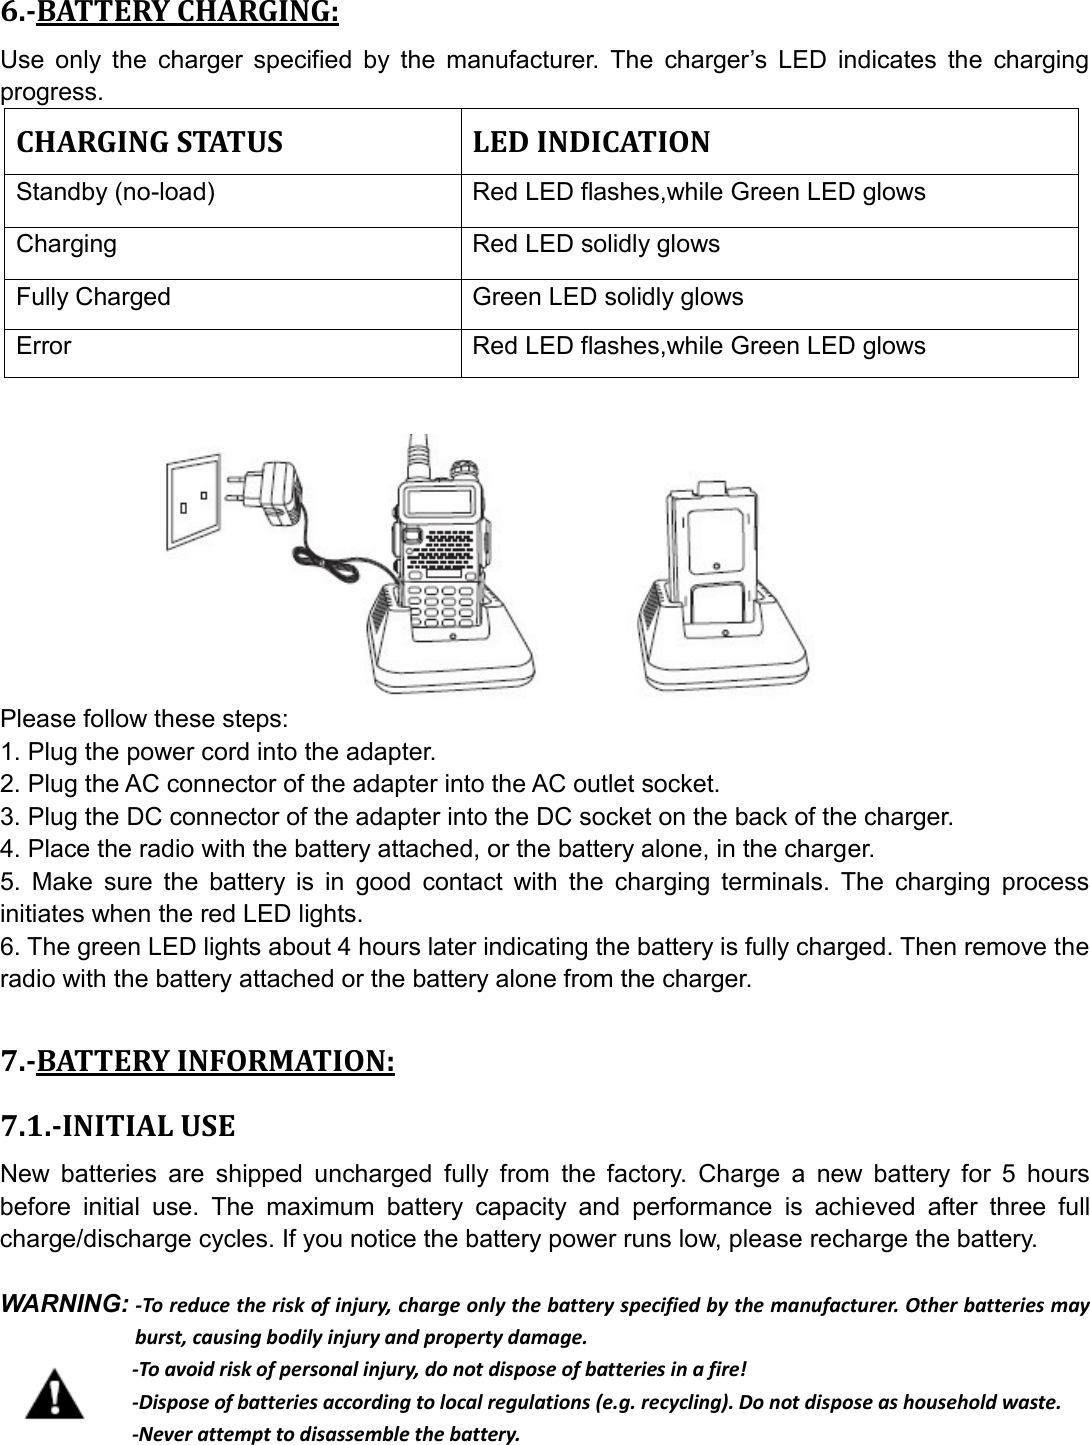 6.-BATTERY CHARGING: Use  only  the  charger  specified  by  the  manufacturer.  The  charger’s  LED  indicates  the  charging progress. CHARGING STATUS  LED INDICATION Standby (no-load)    Red LED flashes,while Green LED glows   Charging    Red LED solidly glows Fully Charged  Green LED solidly glows Error  Red LED flashes,while Green LED glows           Please follow these steps: 1. Plug the power cord into the adapter. 2. Plug the AC connector of the adapter into the AC outlet socket. 3. Plug the DC connector of the adapter into the DC socket on the back of the charger. 4. Place the radio with the battery attached, or the battery alone, in the charger. 5.  Make  sure  the  battery  is  in  good  contact  with  the  charging  terminals.  The  charging  process initiates when the red LED lights. 6. The green LED lights about 4 hours later indicating the battery is fully charged. Then remove the radio with the battery attached or the battery alone from the charger.  7.-BATTERY INFORMATION: 7.1.-INITIAL USE New  batteries  are  shipped  uncharged  fully  from  the  factory.  Charge  a  new  battery  for  5  hours before  initial  use.  The  maximum  battery  capacity  and  performance  is  achieved  after  three  full charge/discharge cycles. If you notice the battery power runs low, please recharge the battery.  WARNING: -To reduce the risk of injury, charge only the battery specified by the manufacturer. Other batteries may burst, causing bodily injury and property damage.              -To avoid risk of personal injury, do not dispose of batteries in a fire!              -Dispose of batteries according to local regulations (e.g. recycling). Do not dispose as household waste.              -Never attempt to disassemble the battery.     